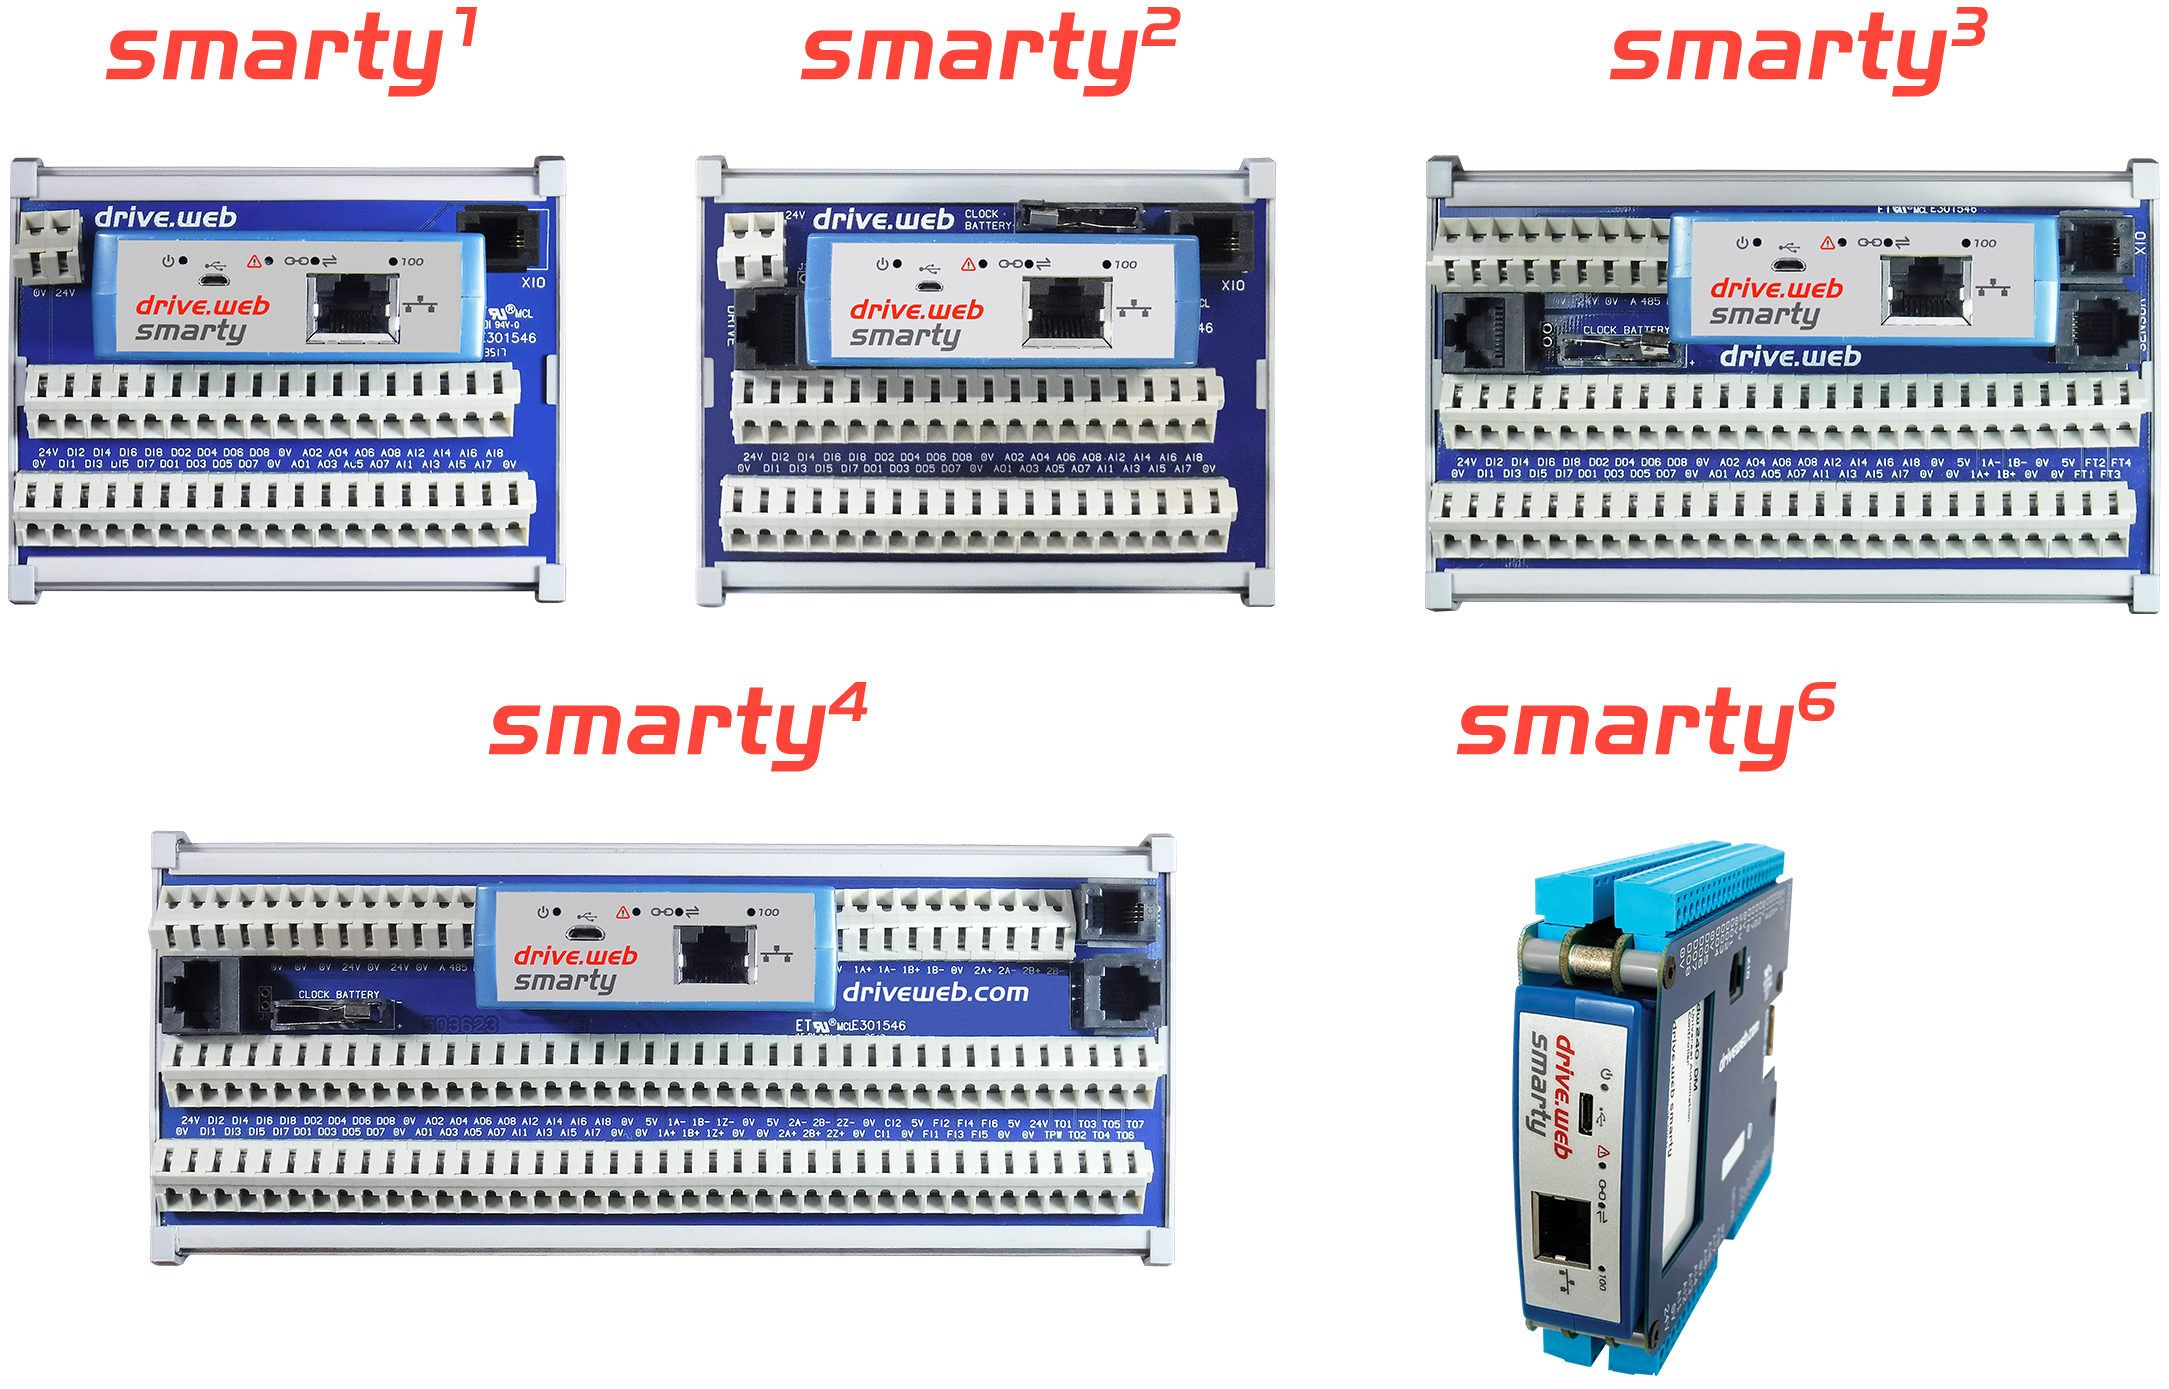 smarty1-6 with labels